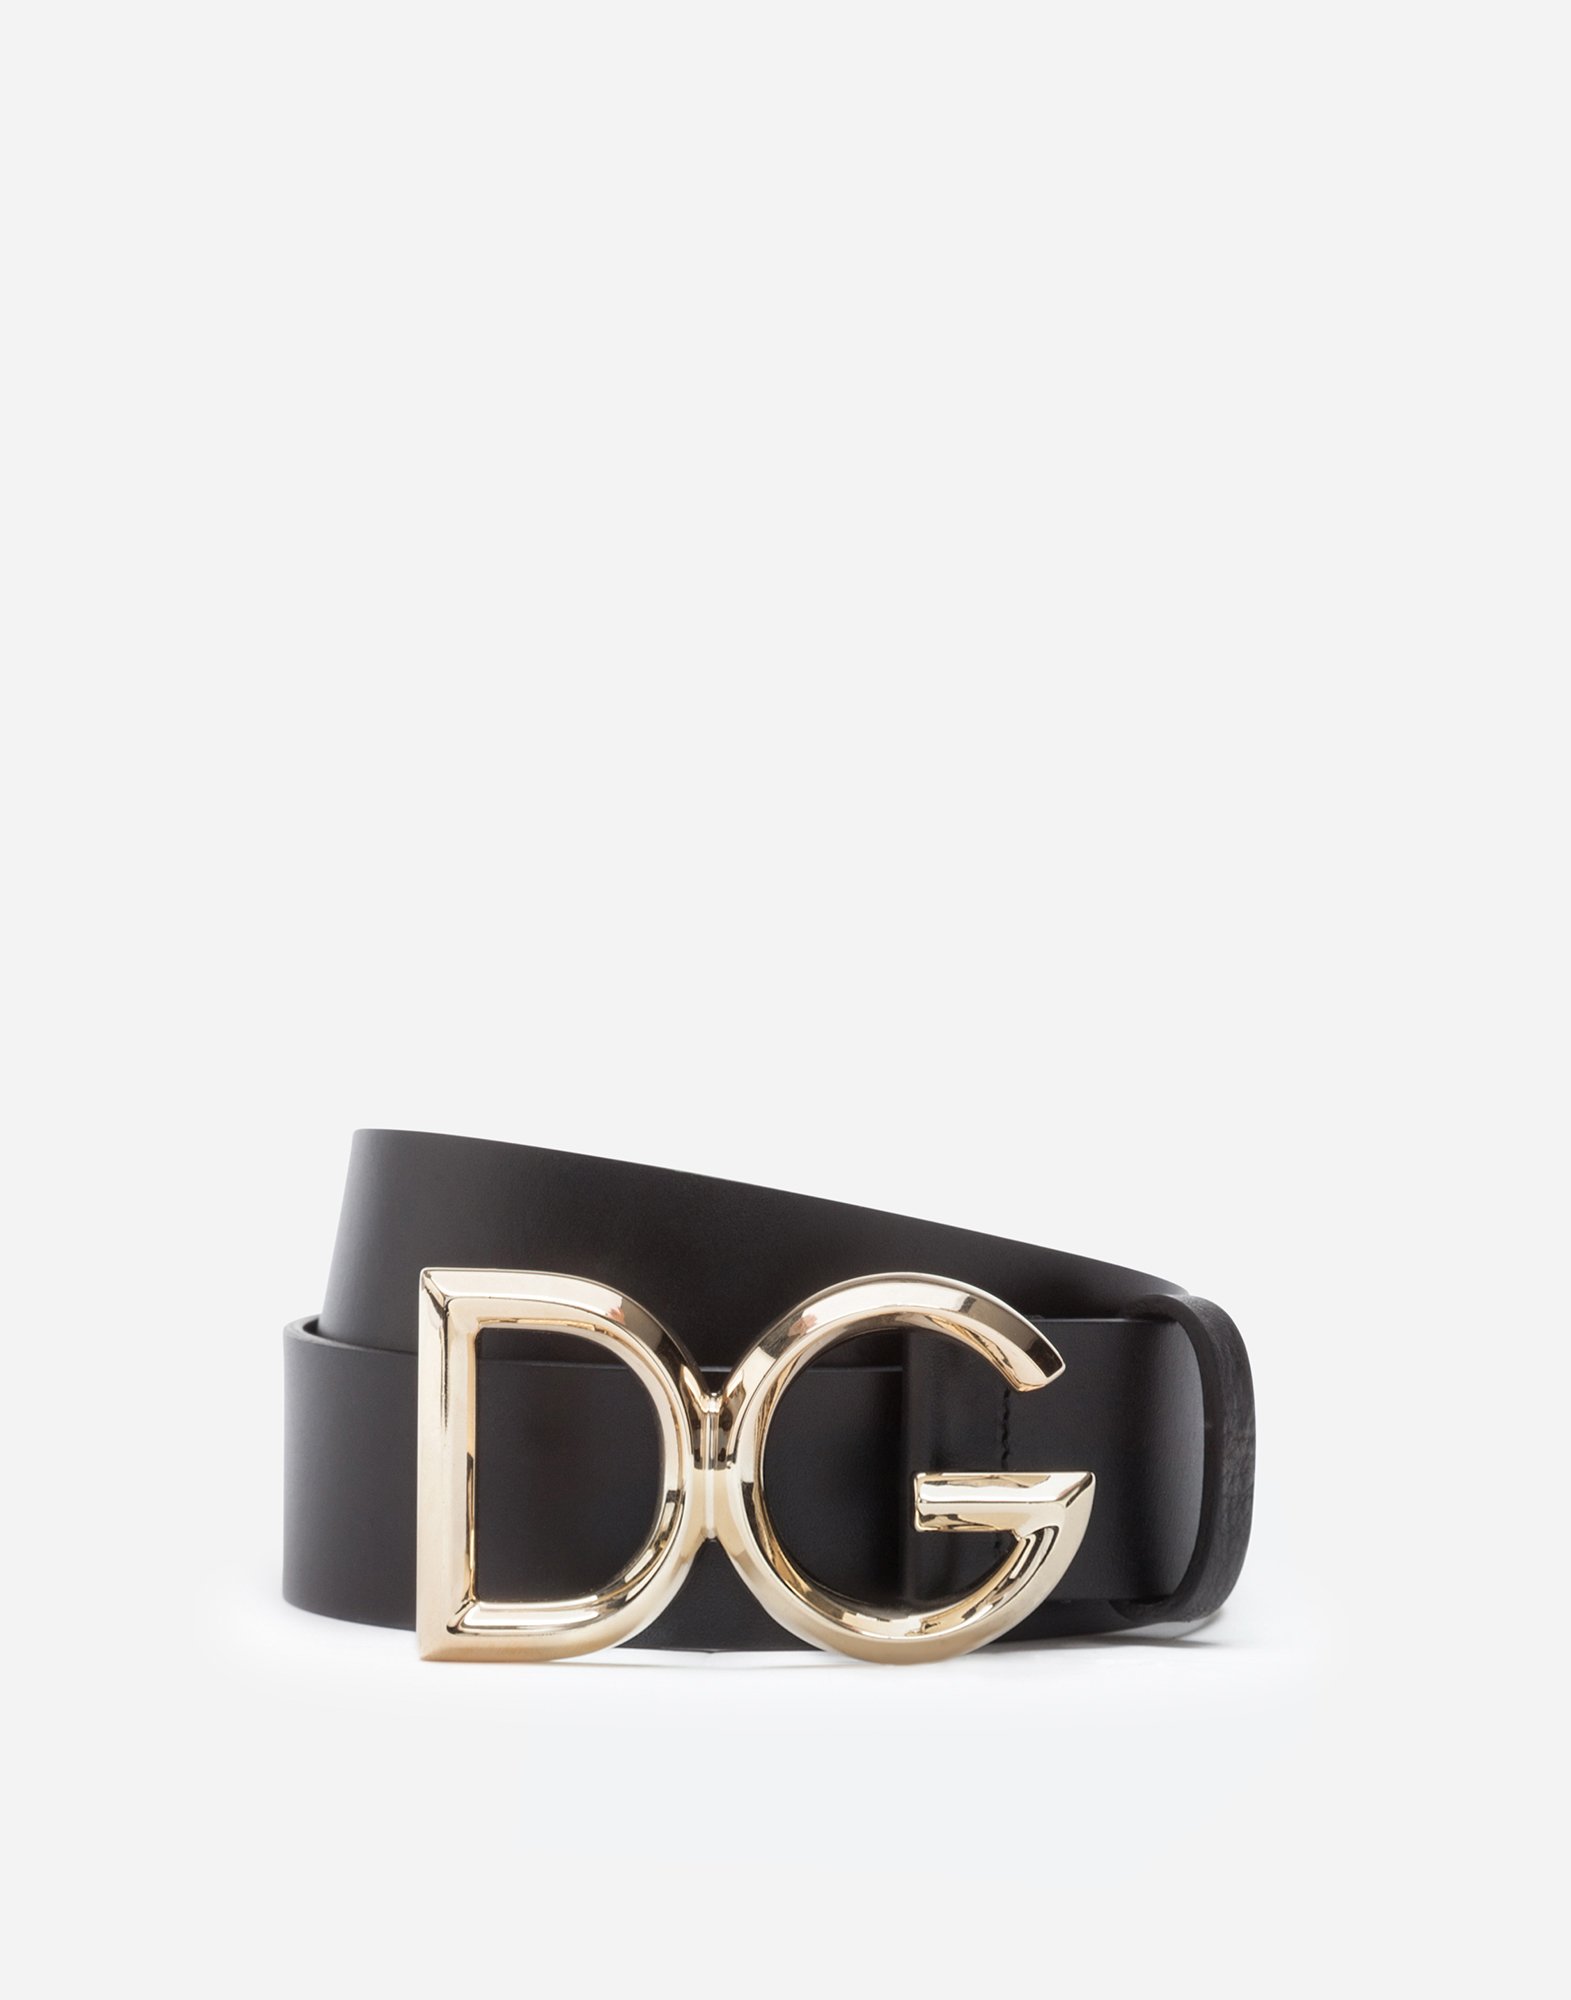 Luxury leather belt with DG logo in Black/Gold